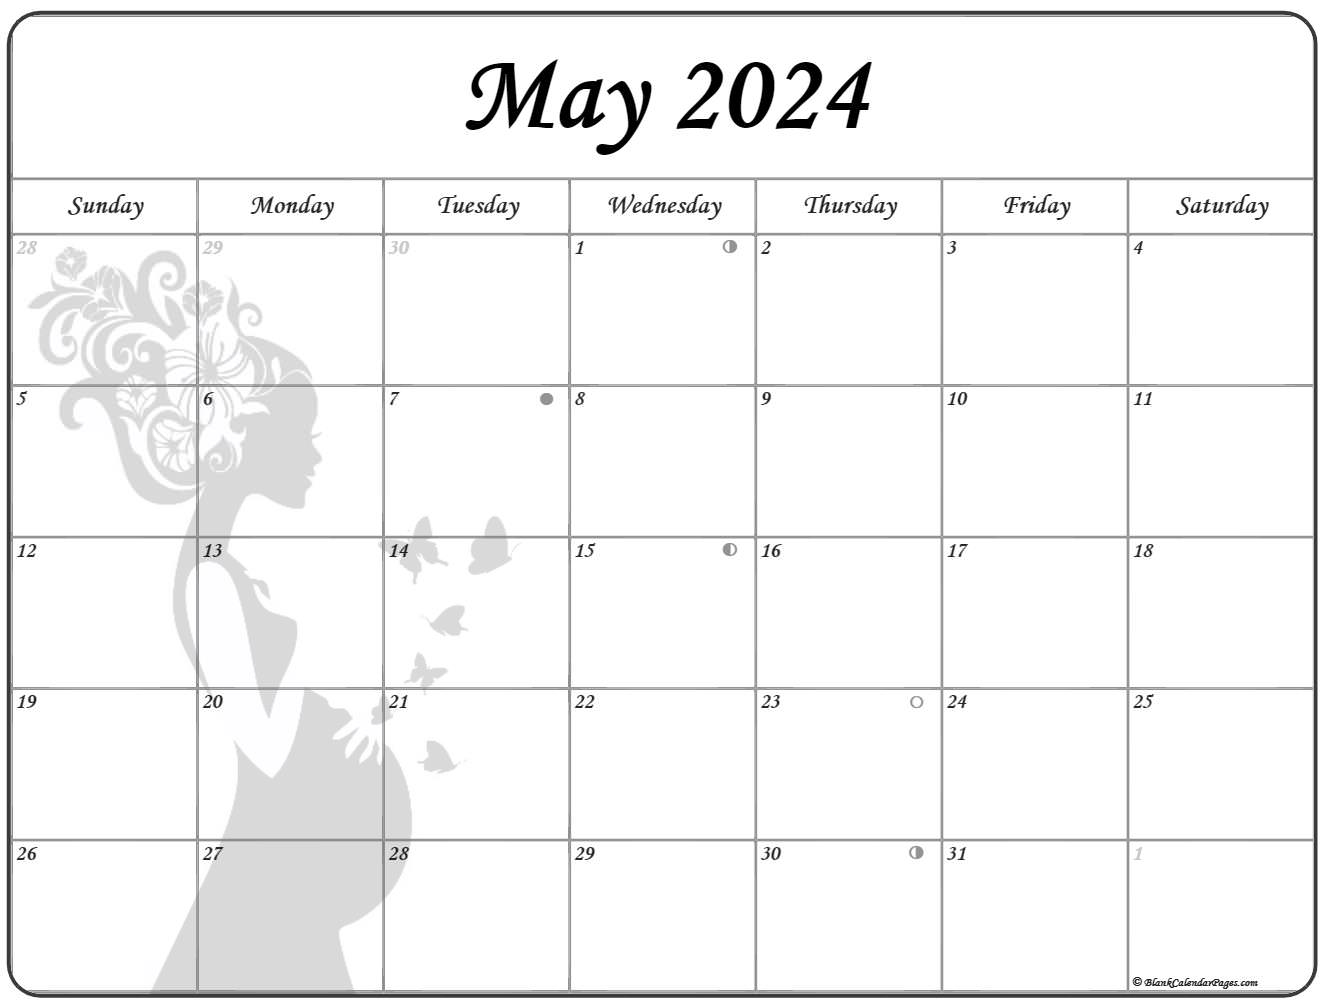 Collection Of May 2023 Photo Calendars With Image Filters